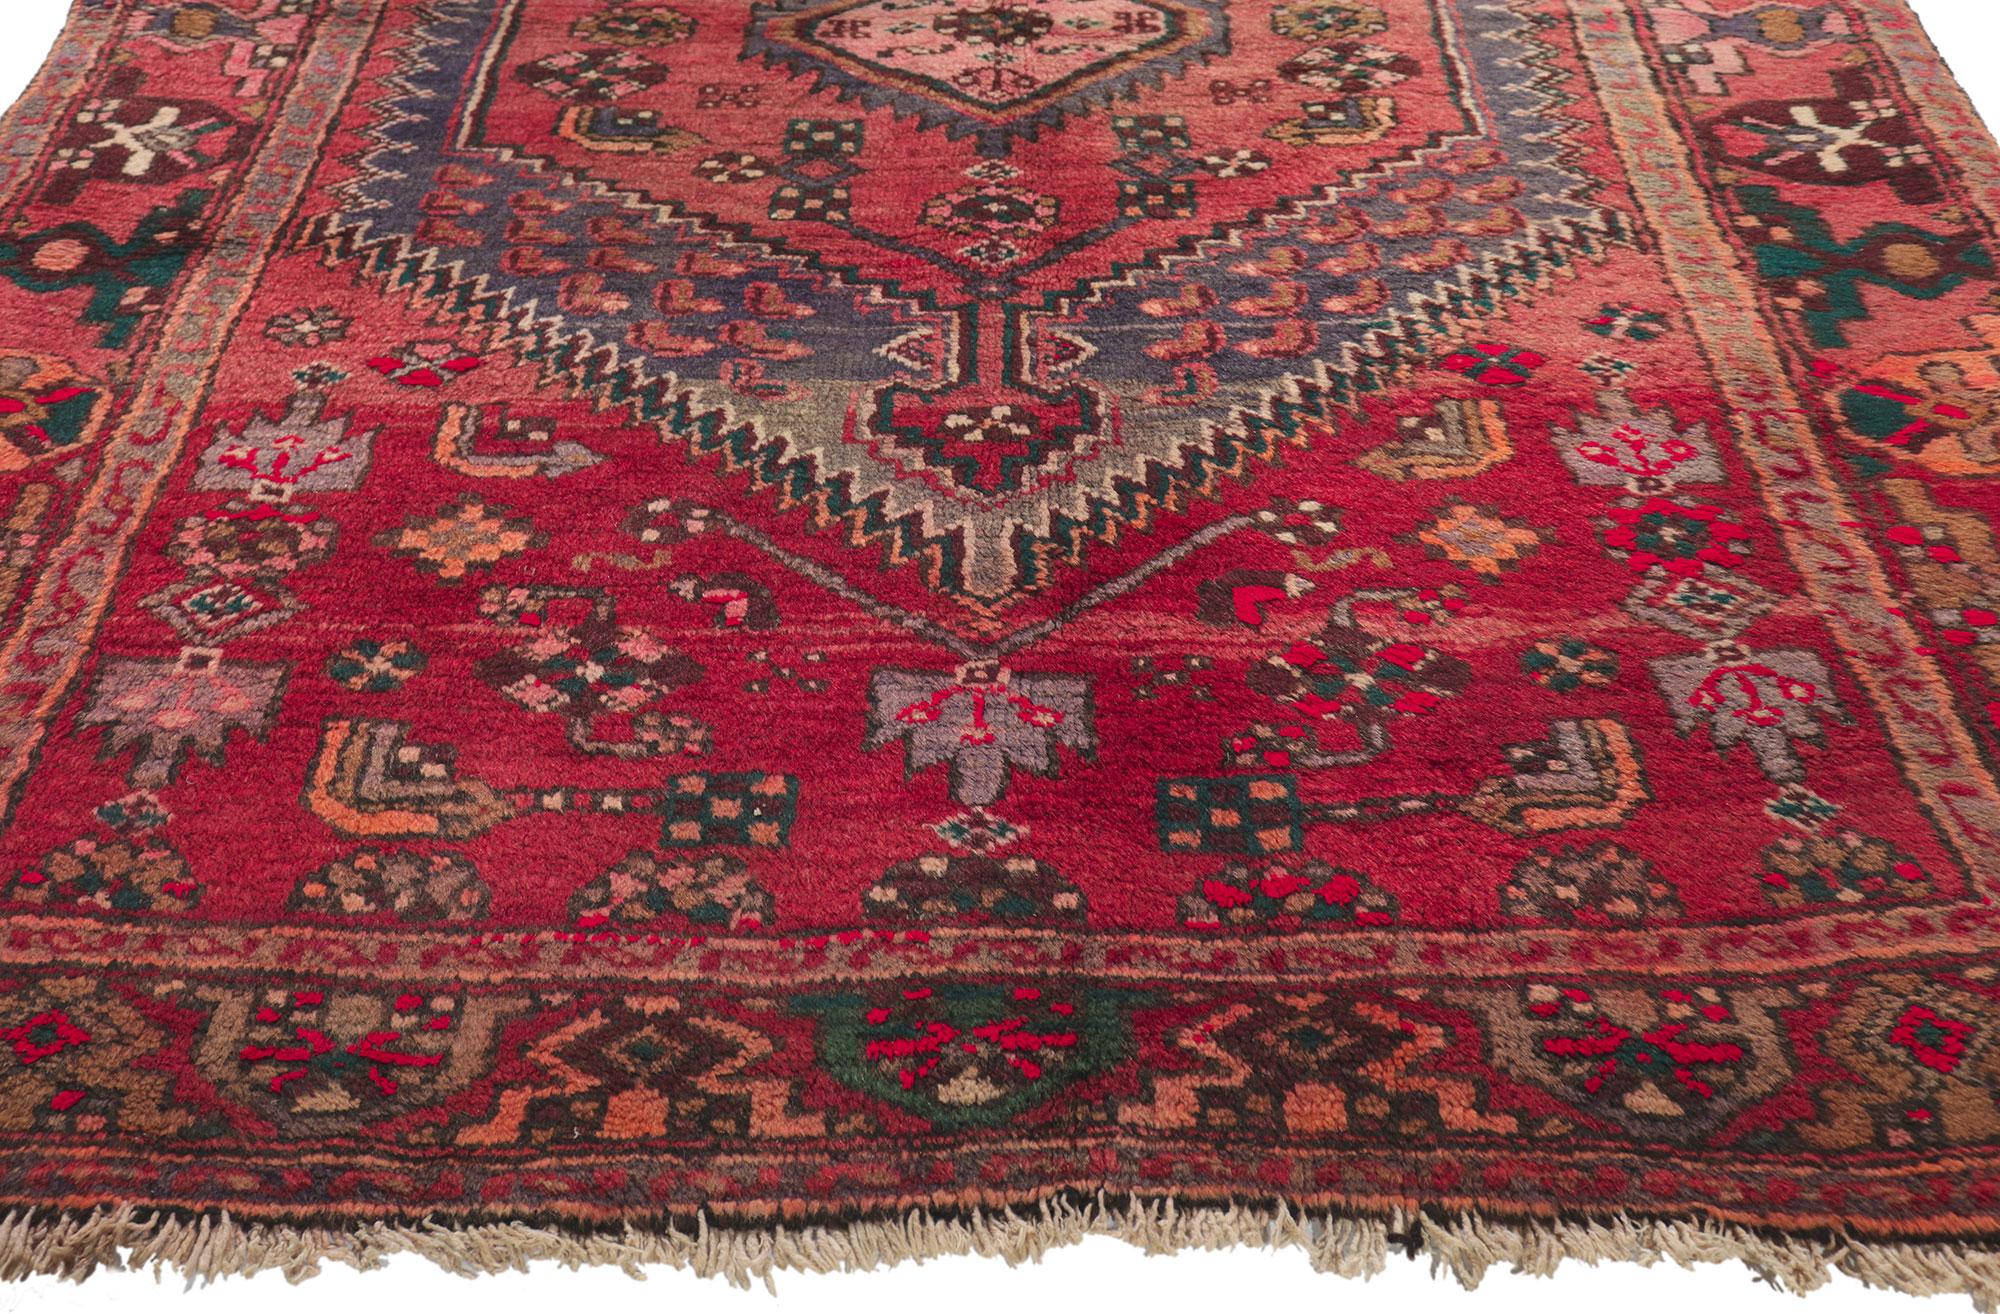 Antique Red Persian Hamadan Tribal Rug  In Good Condition For Sale In Dallas, TX